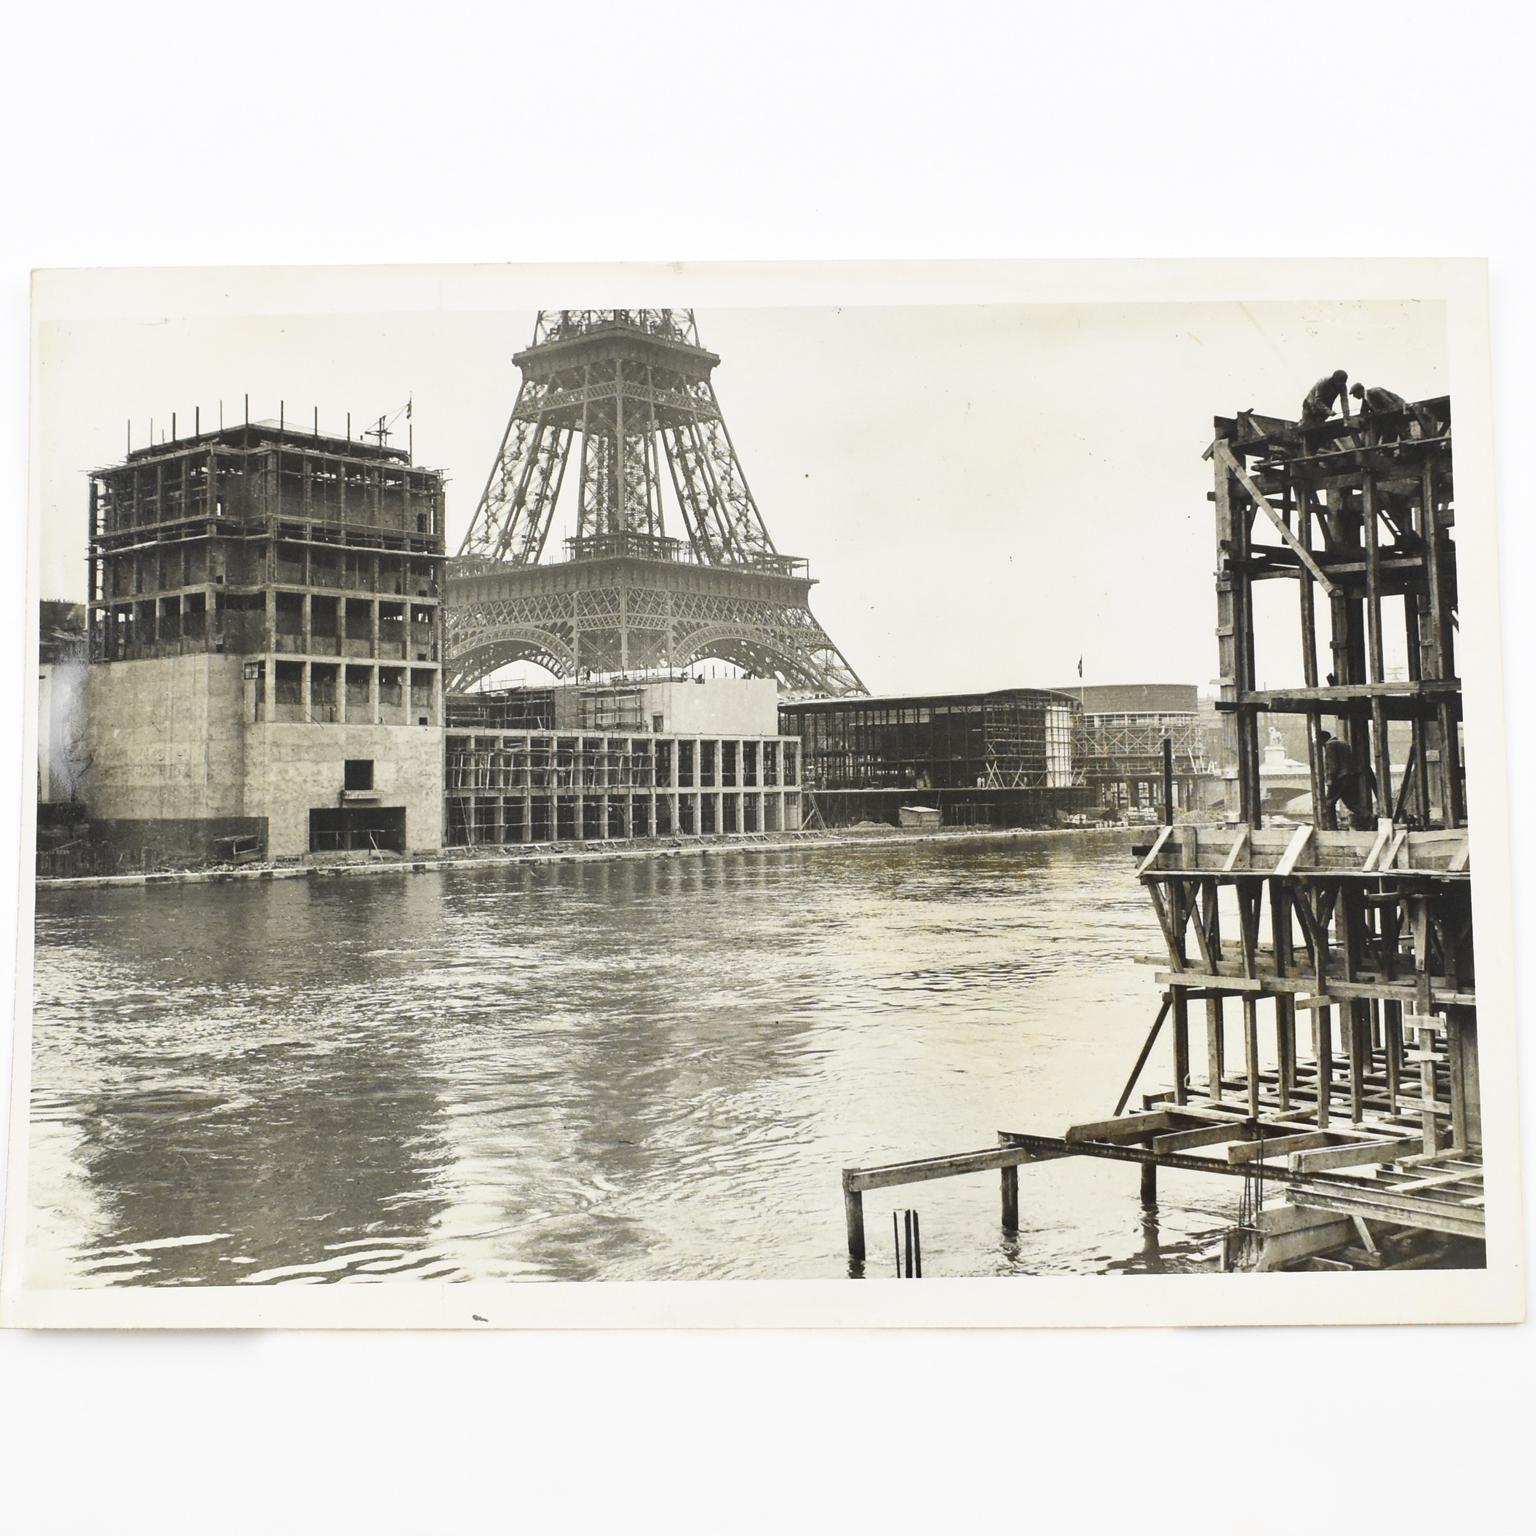 An original silver gelatin black and white photograph by Press Agency ROL, Paris 1937. The International Exhibition Construction, with the Eiffel Tower in the background.
Features:
Original silver gelatin print photograph unframed.
Press